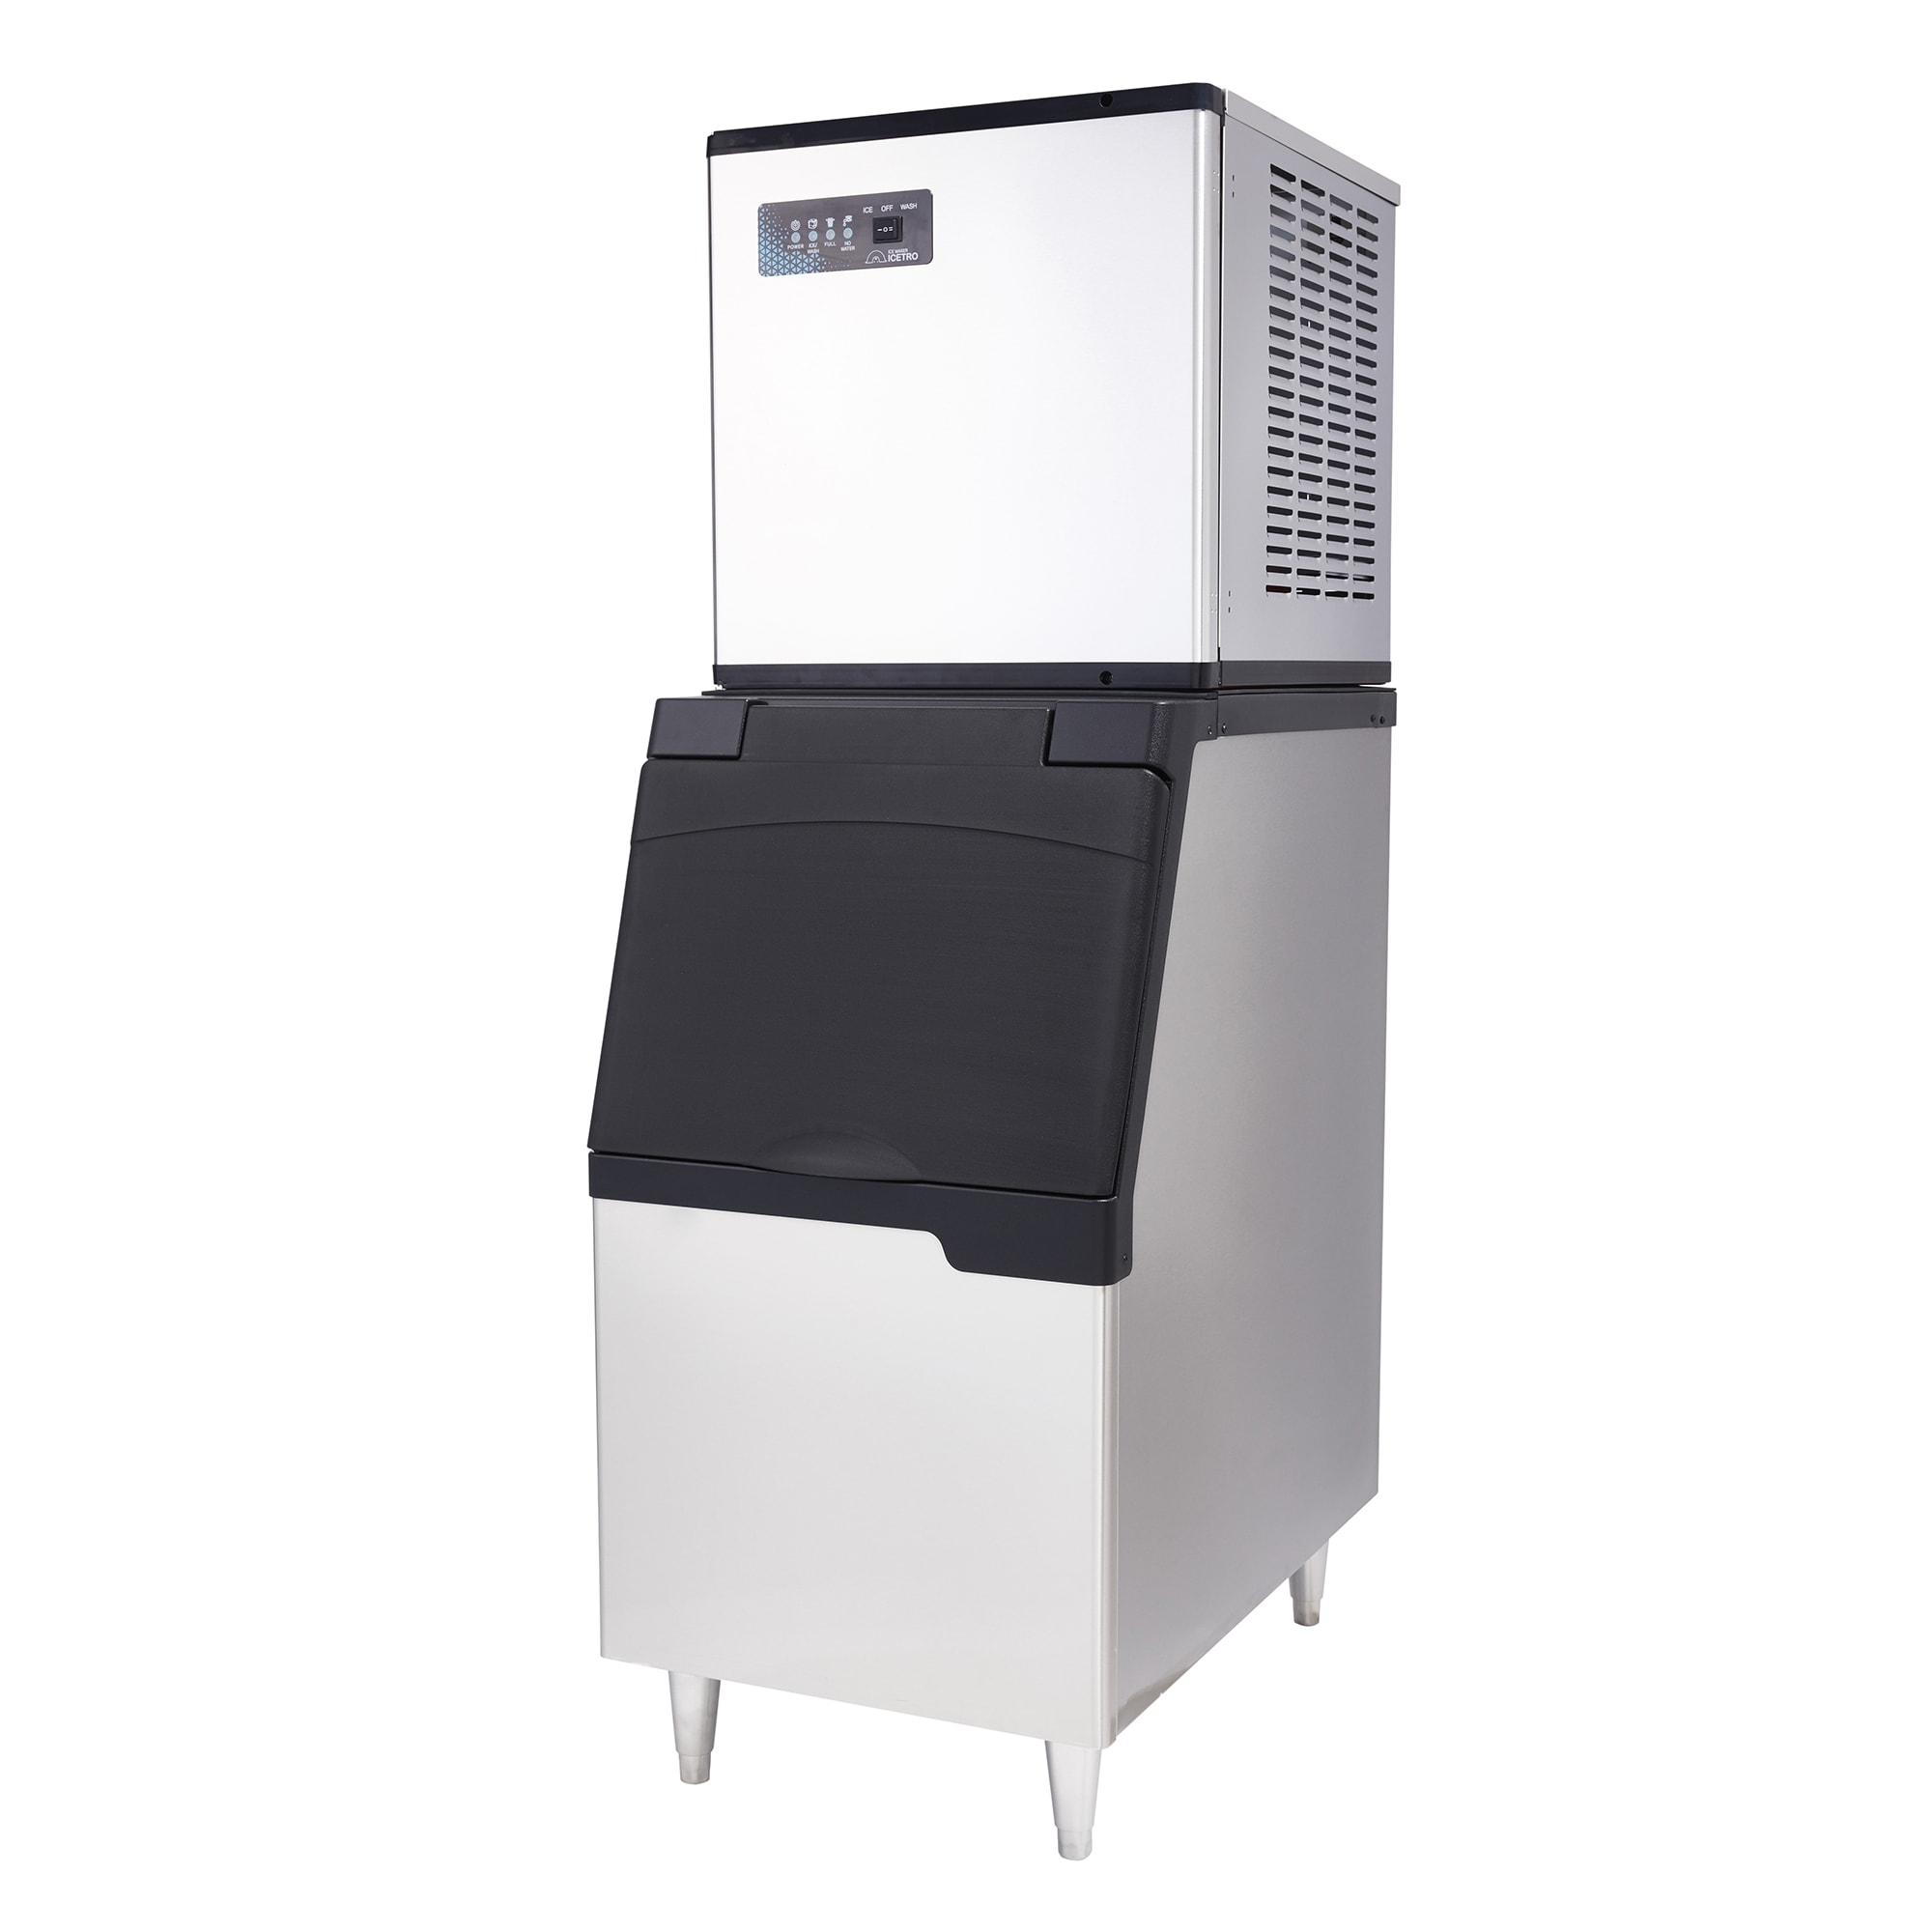 Jersey Jerry on X: If anyone is looking for an ice machine I highly  recommend this. That hospital / Chick- Fil- A ice is money and this machine  makes it. Great investment.